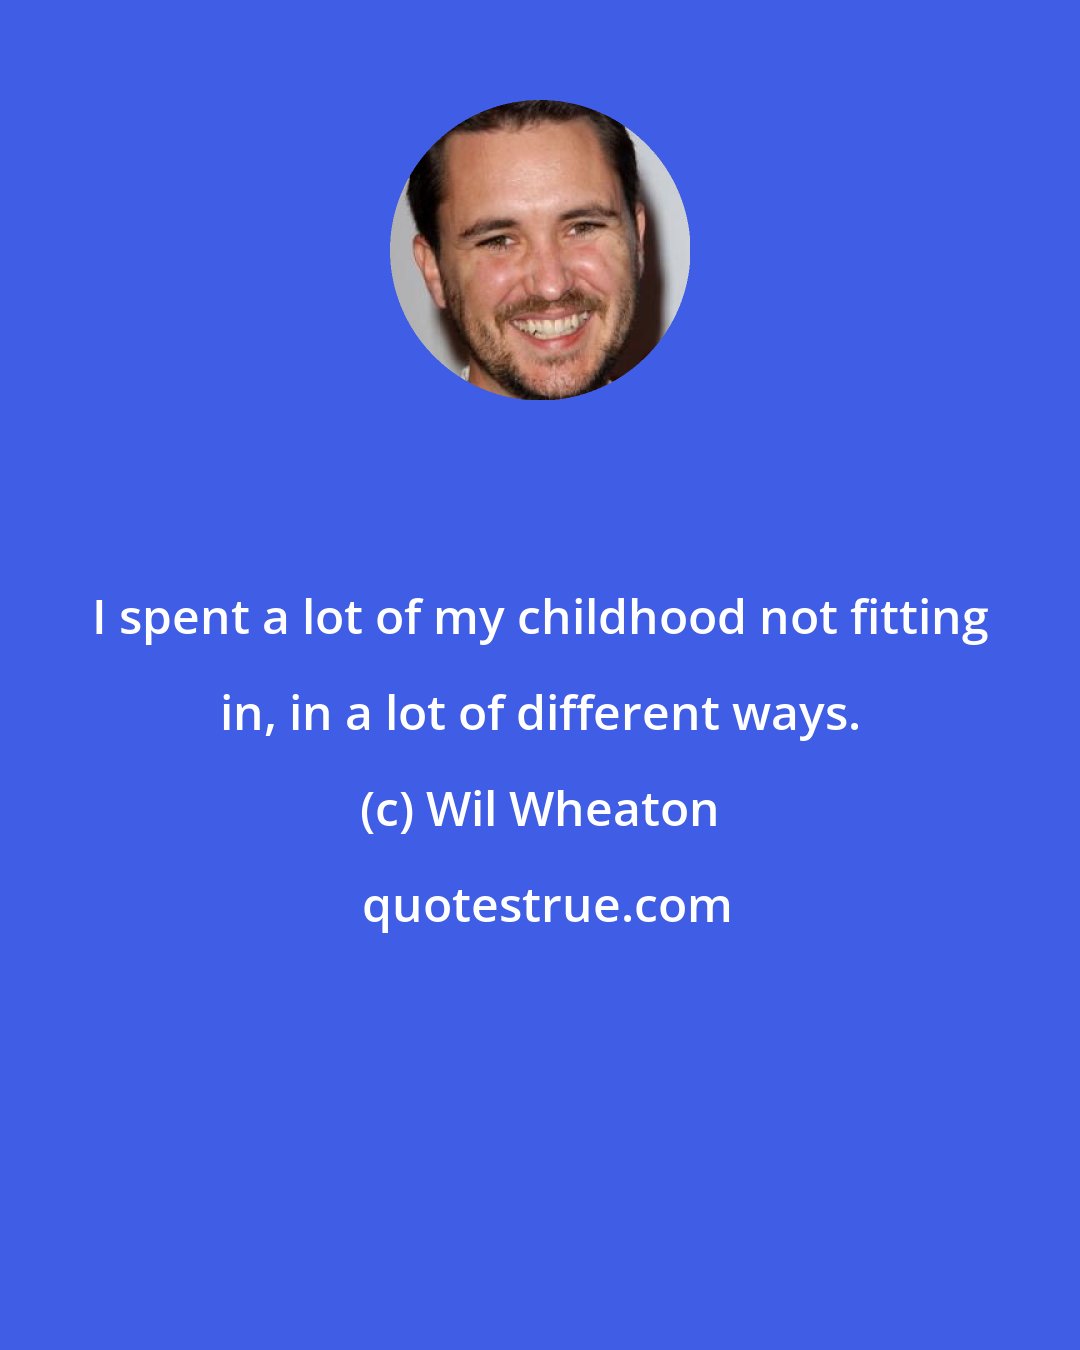 Wil Wheaton: I spent a lot of my childhood not fitting in, in a lot of different ways.